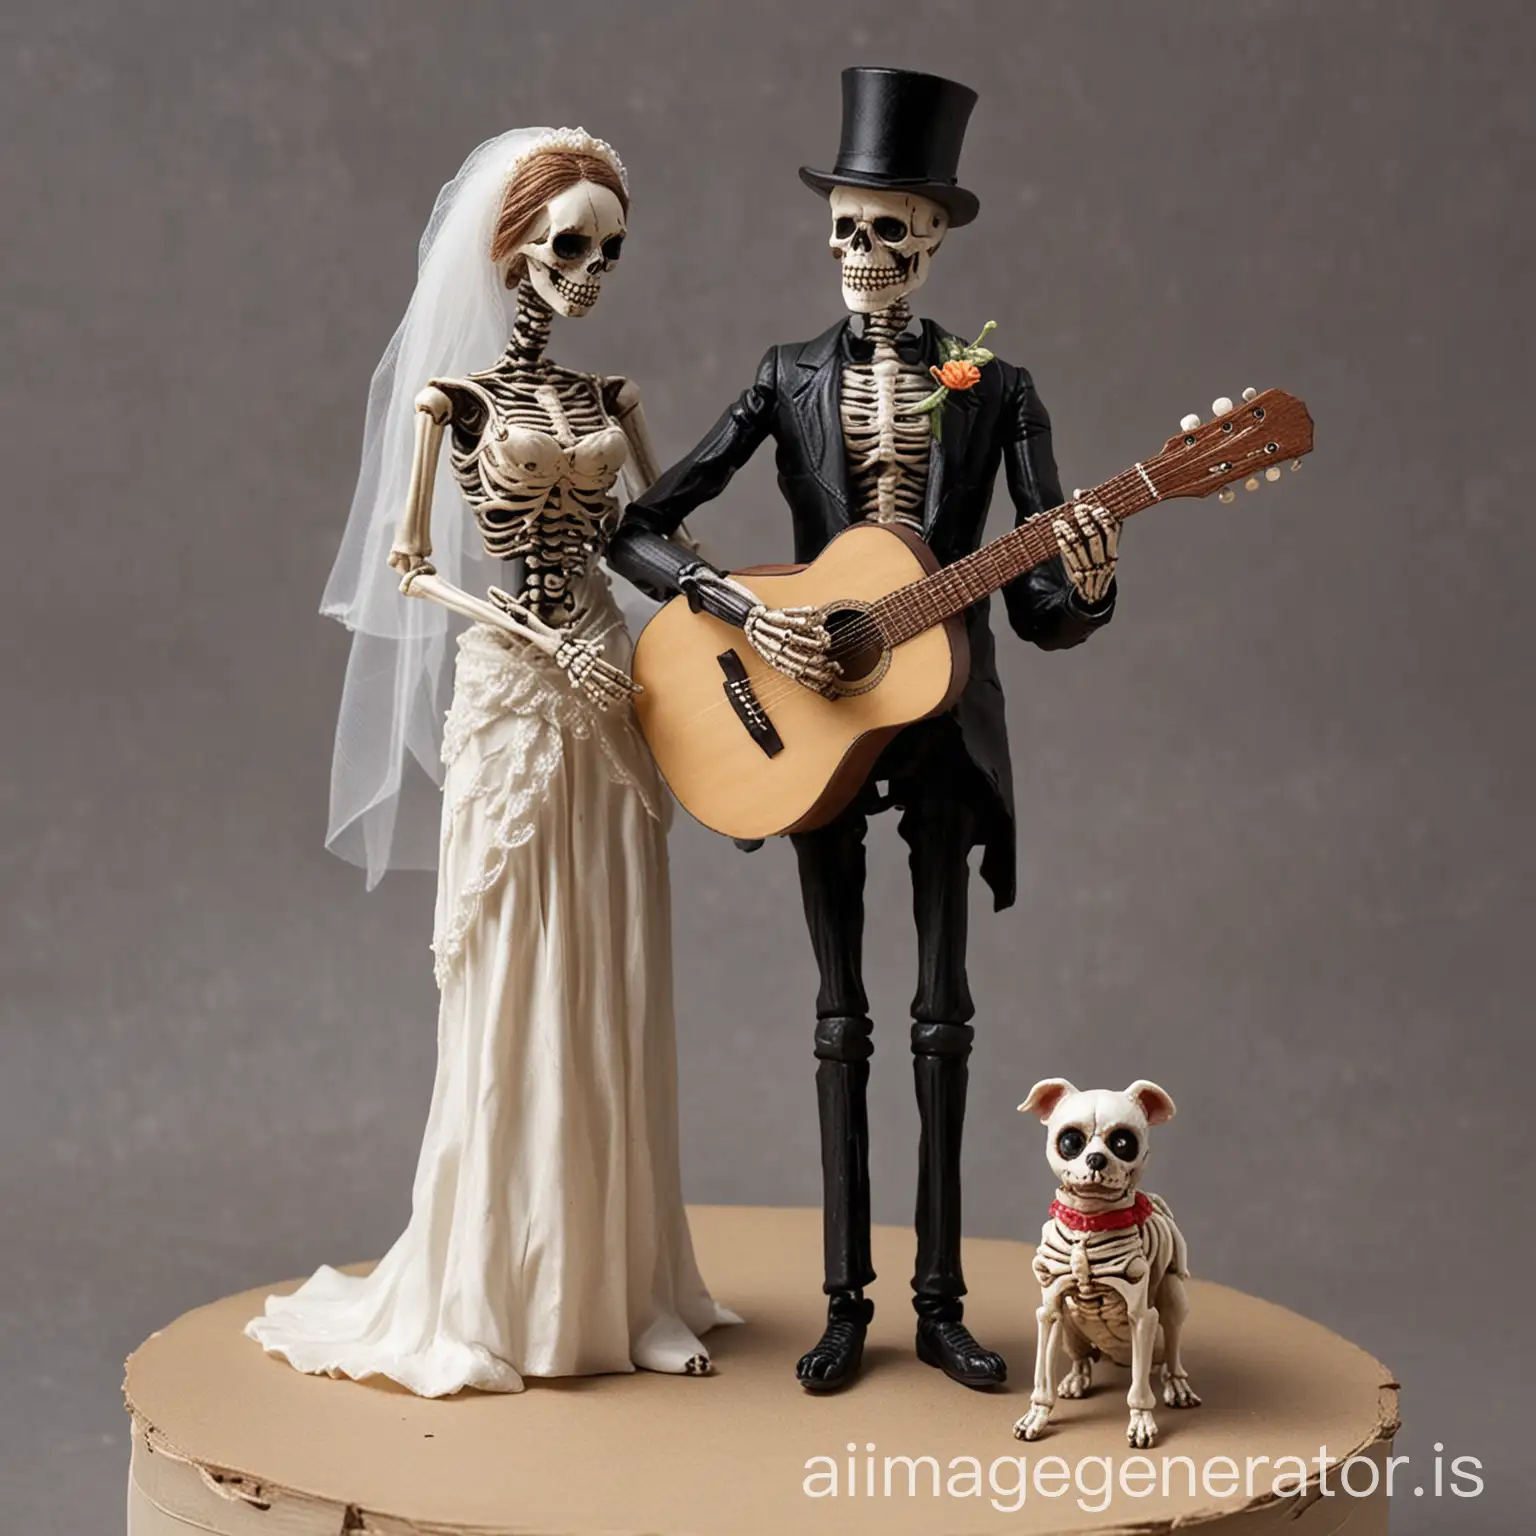 Skeleton-Bride-and-Groom-Wedding-with-Guitar-and-Dog